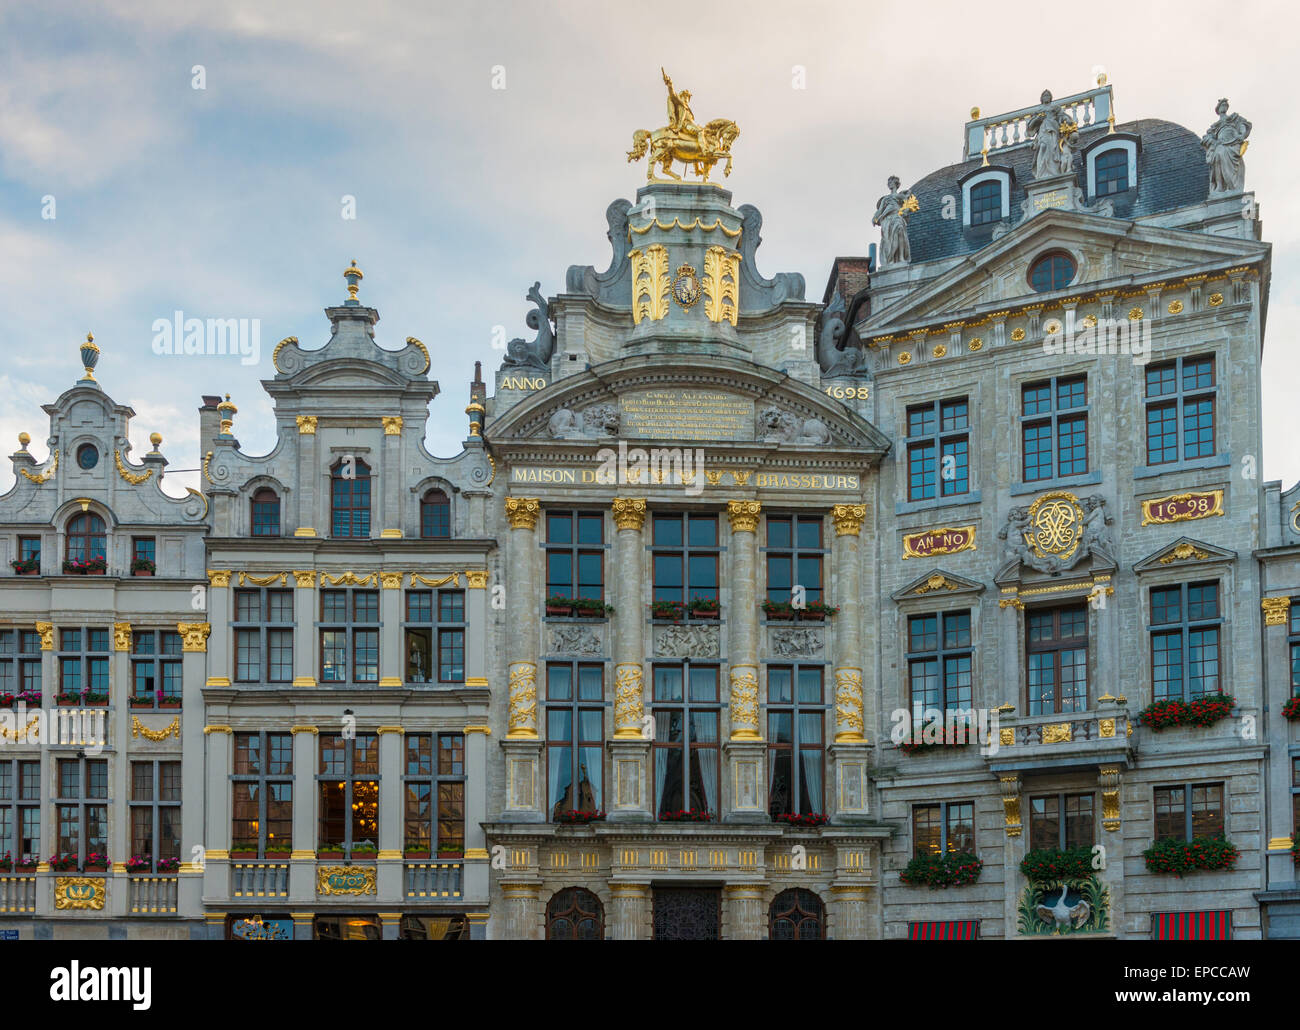 Ornate 17th century Flemish Renaissance buildings in the south corner, Grand Place, Brussels, Belgium, seen in evening light Stock Photo